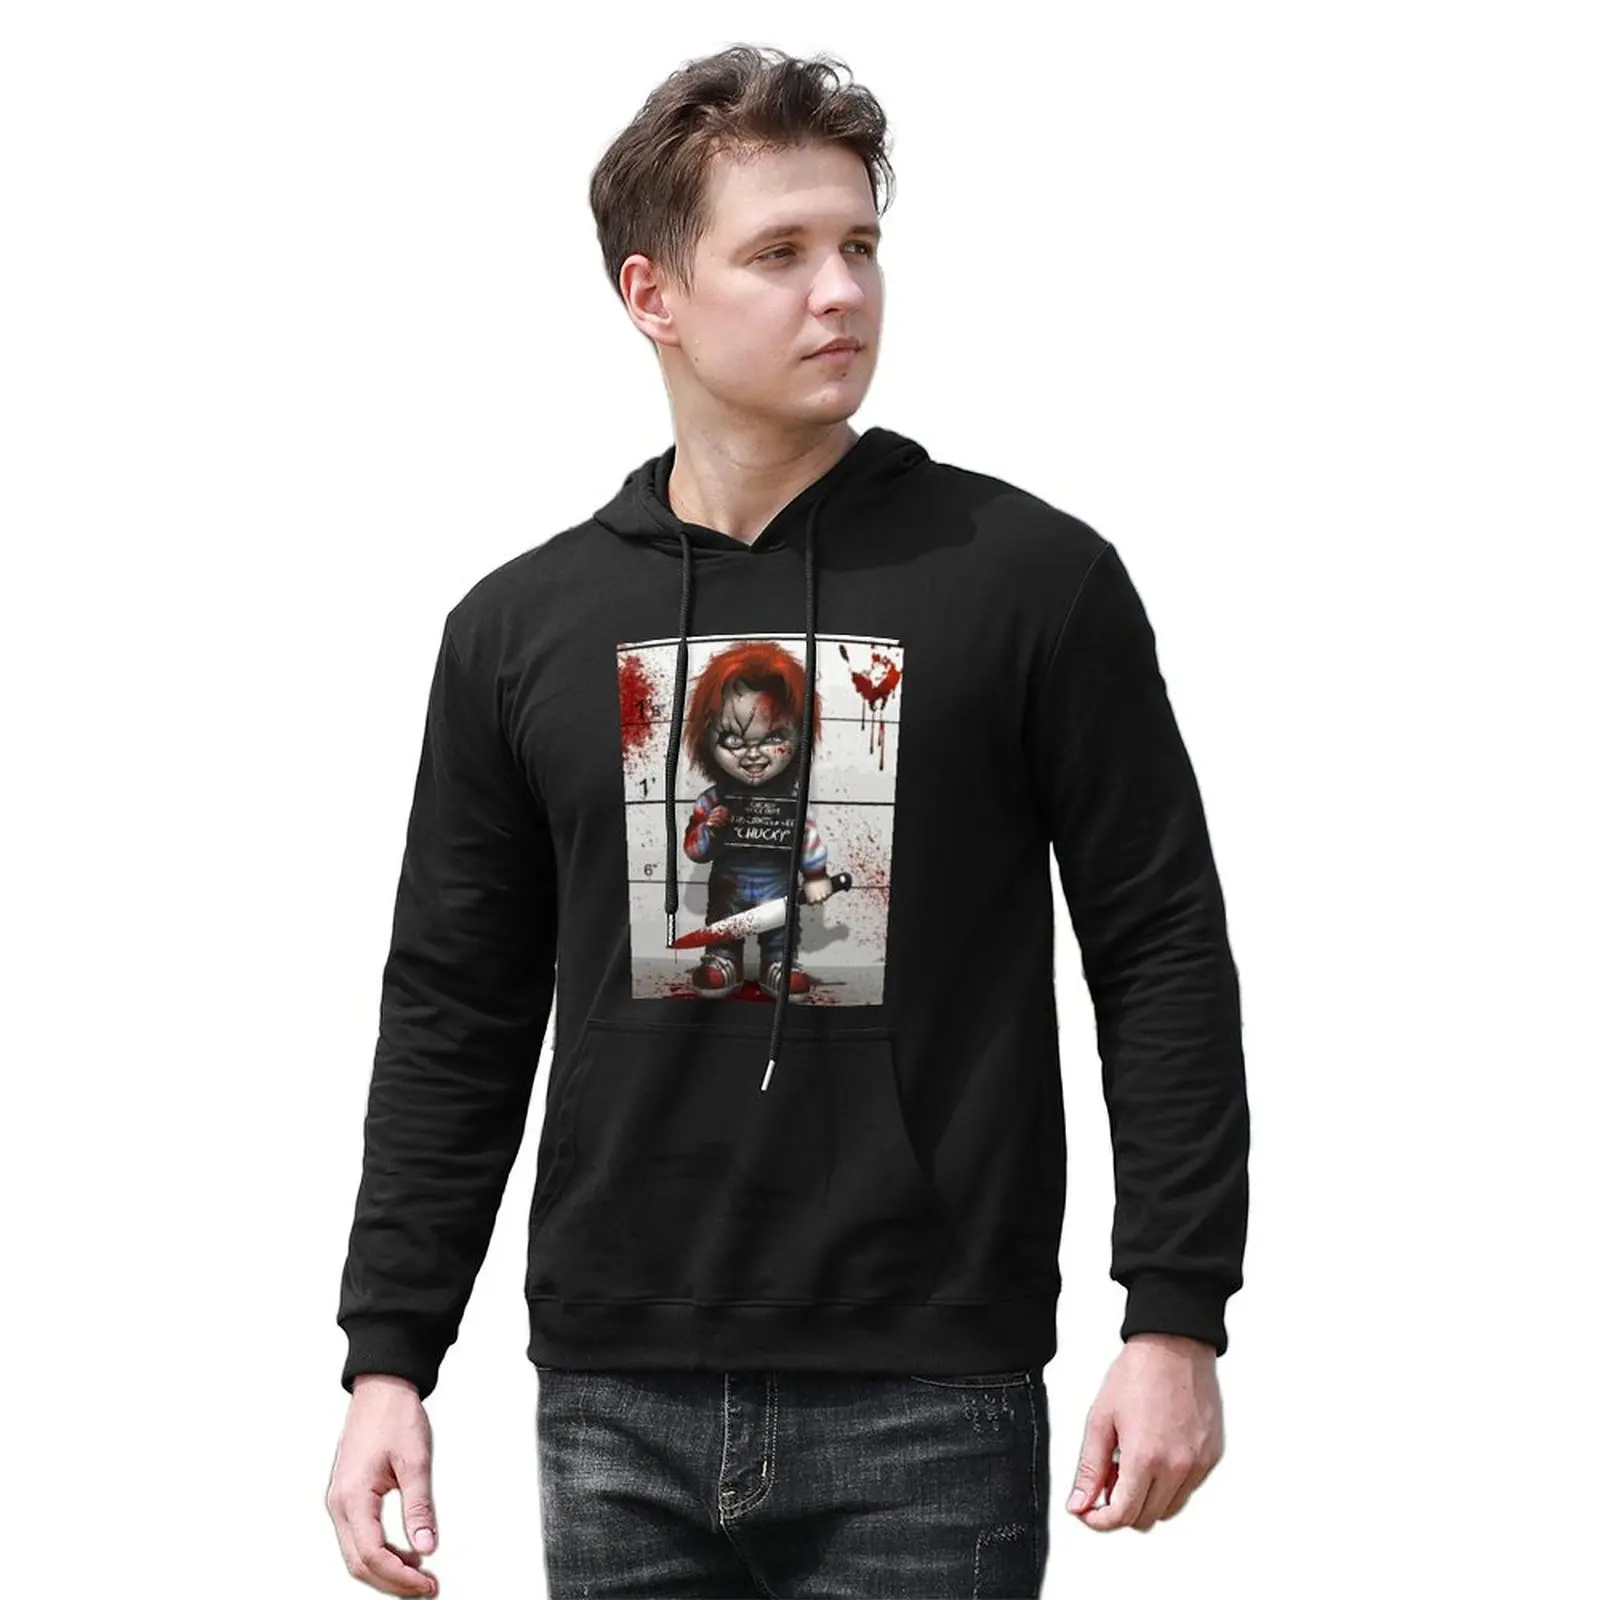 

Chucky from Childs Play Hoodie Fear Hallween Goth Killer Death Movie Fashion Big Cotton Hoodies Autumn Outdoor Pullover Hoodie